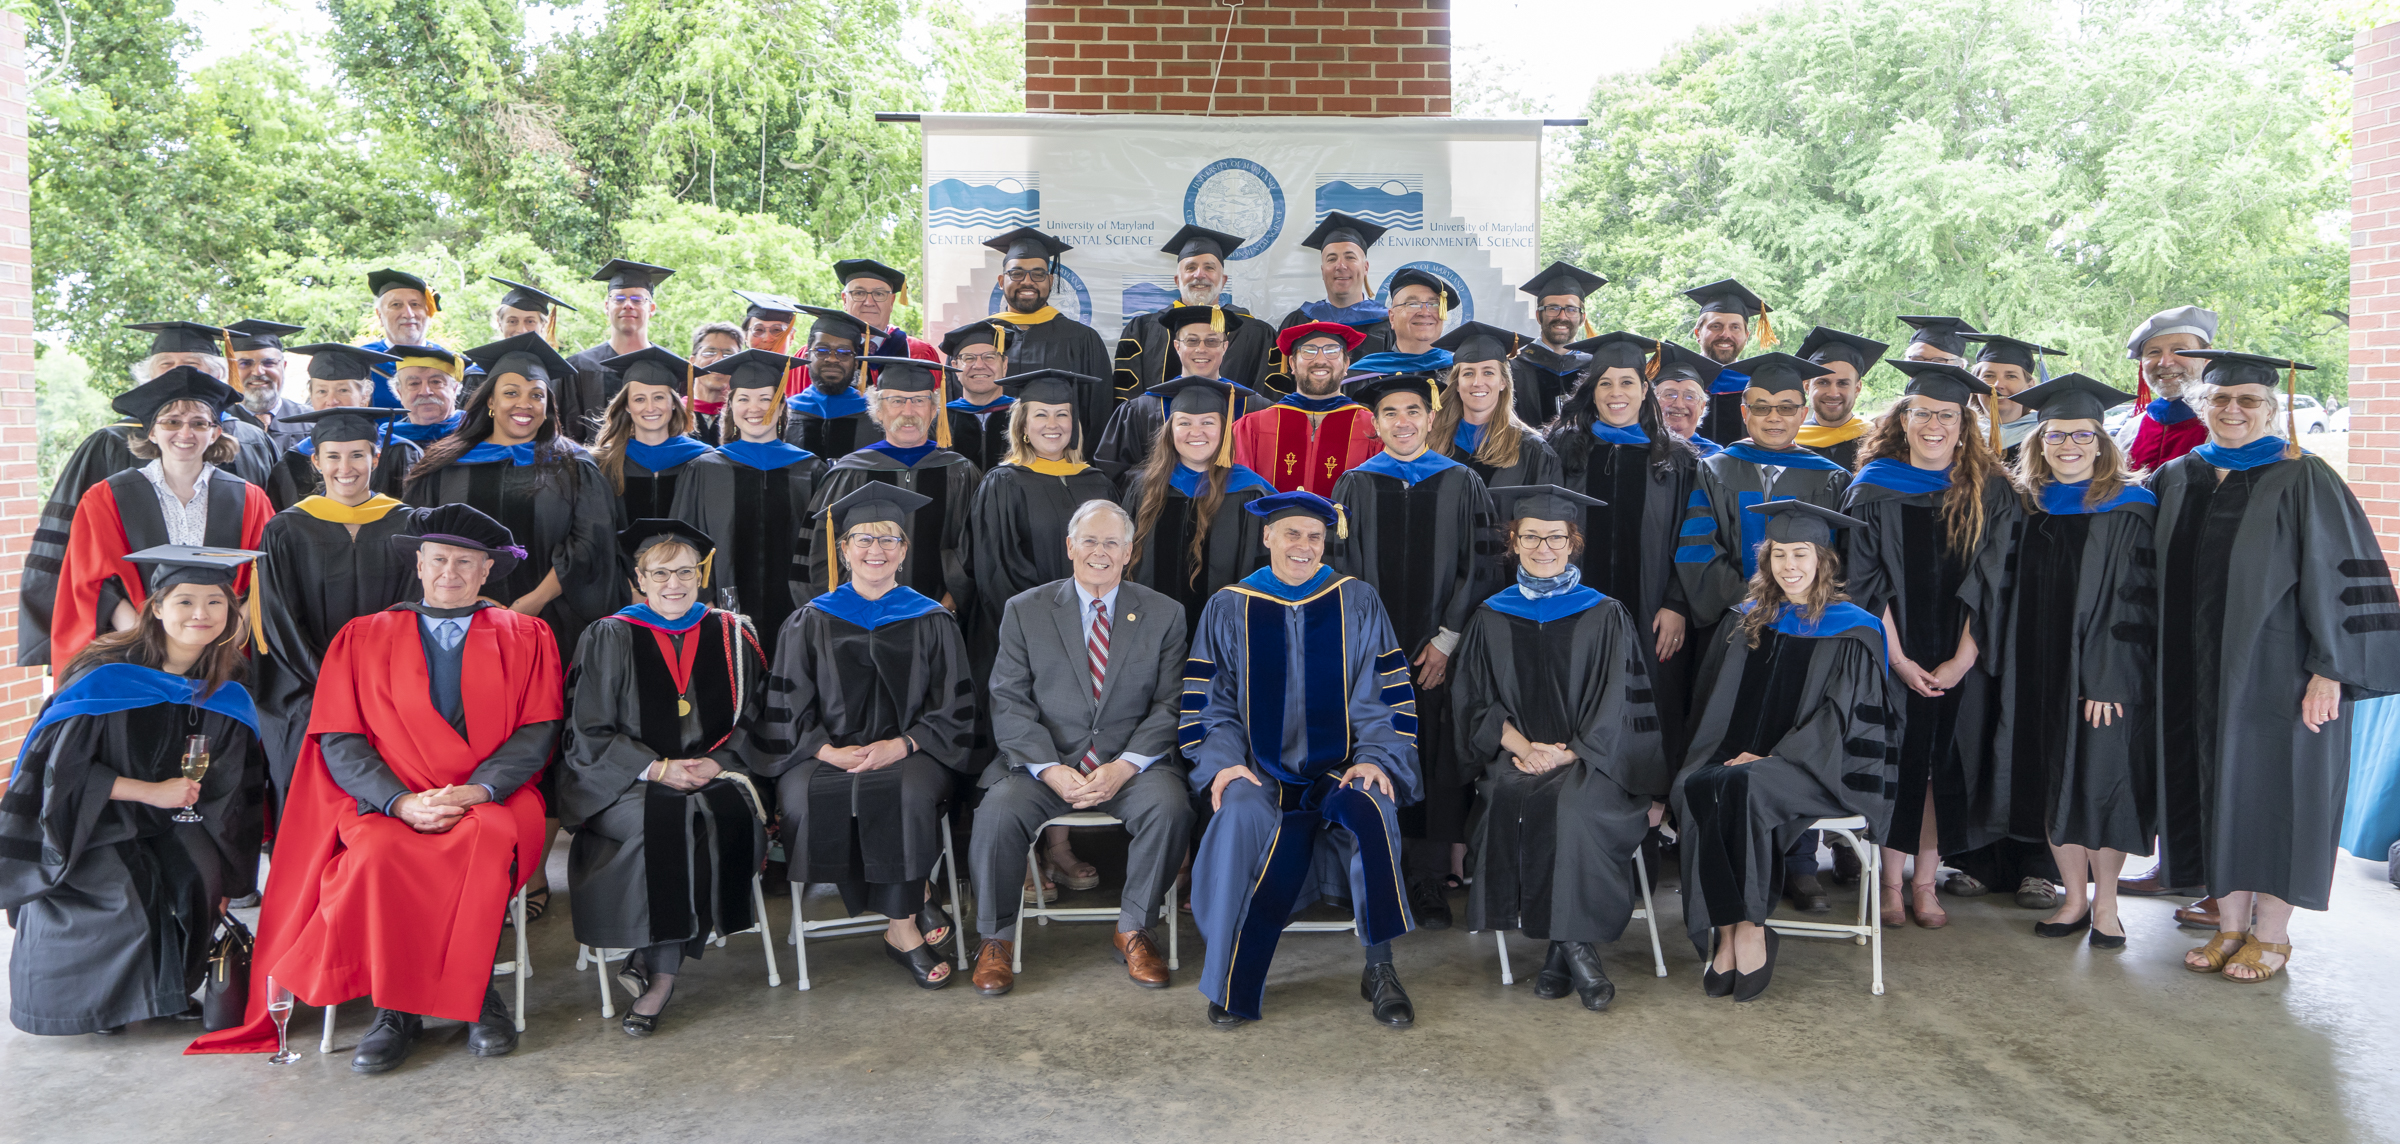 A photo of all the graduates and advisors attending the 2022 Commencement ceremony